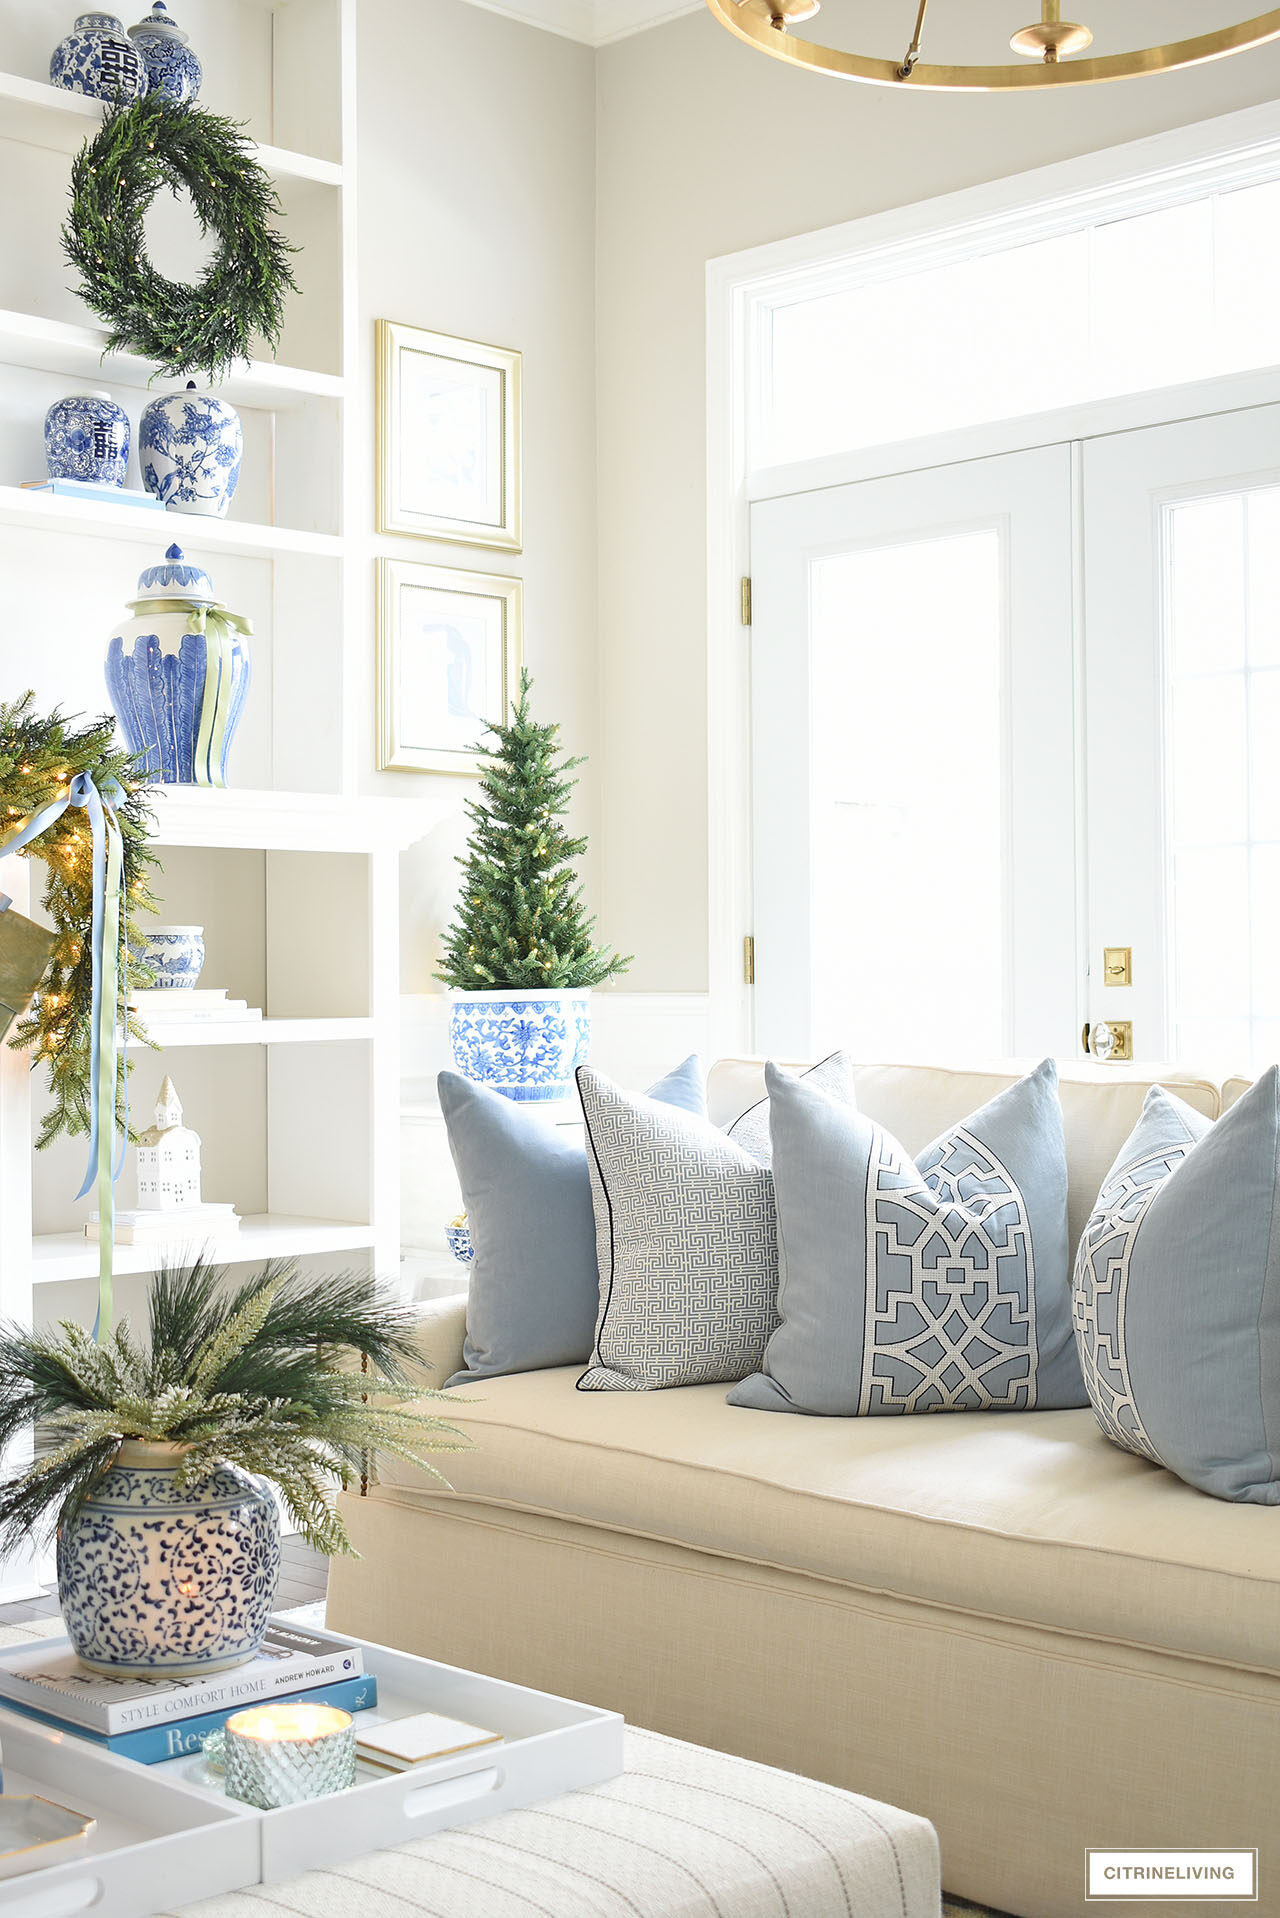 Blue and white throw pillows on a white sofa, Christmas decor around the living room with greenery and blue and white chinoiserie.